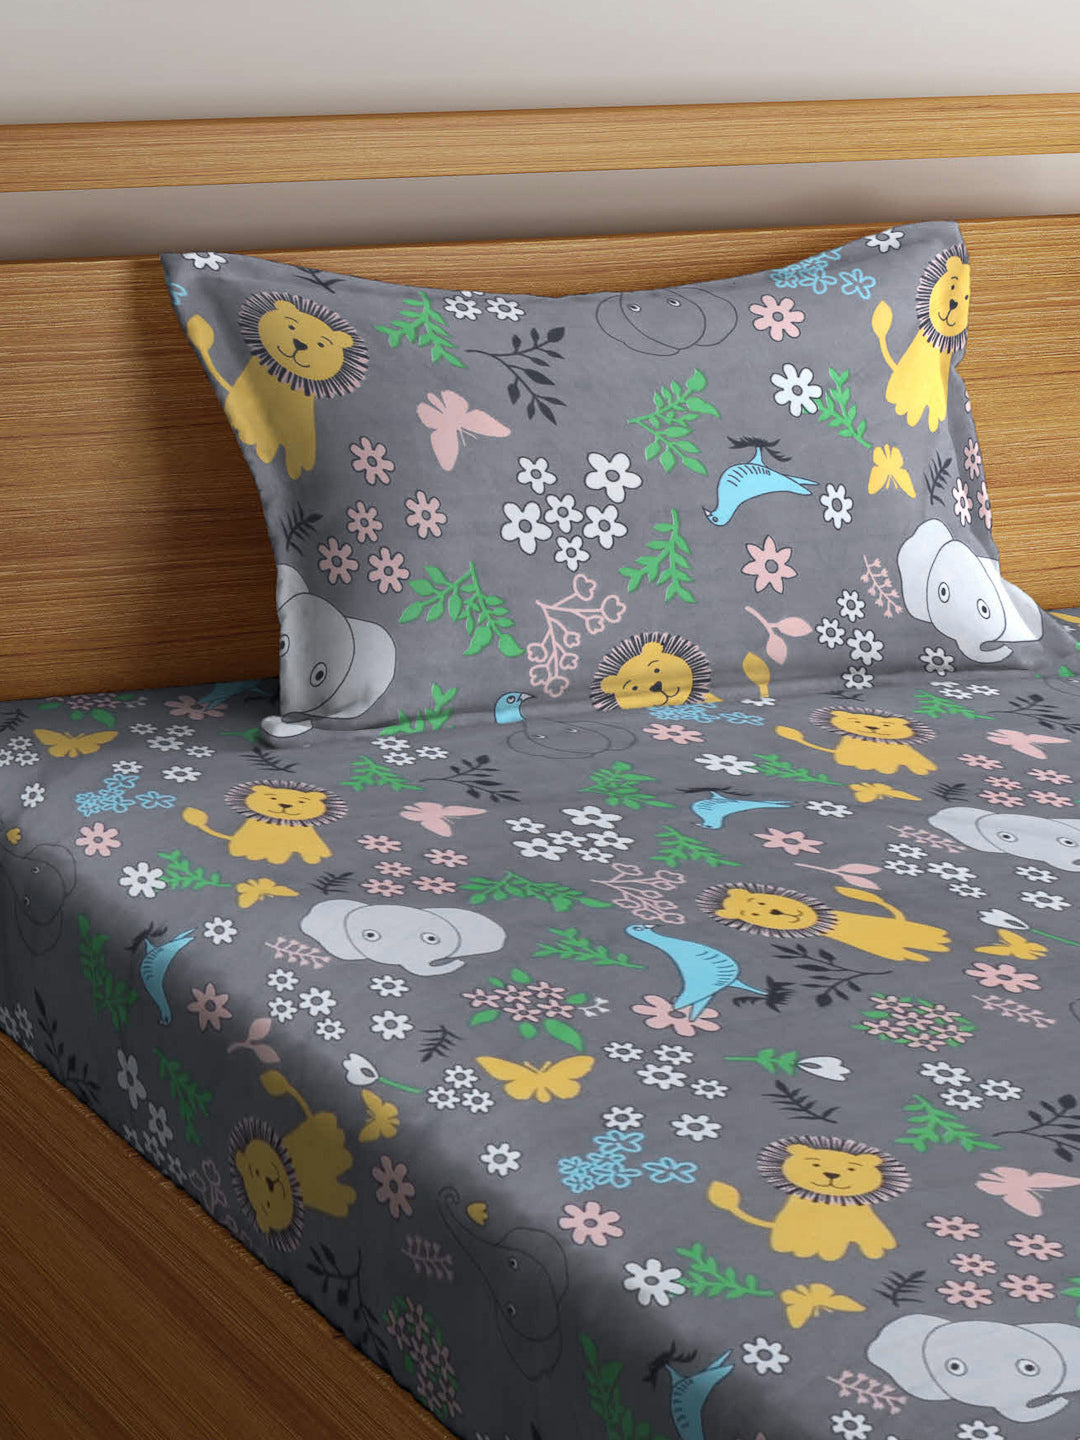 Klotthe Multi Cartoon Characters Polycotton 250 TC Flat Single Bedsheet with Pillow Cover